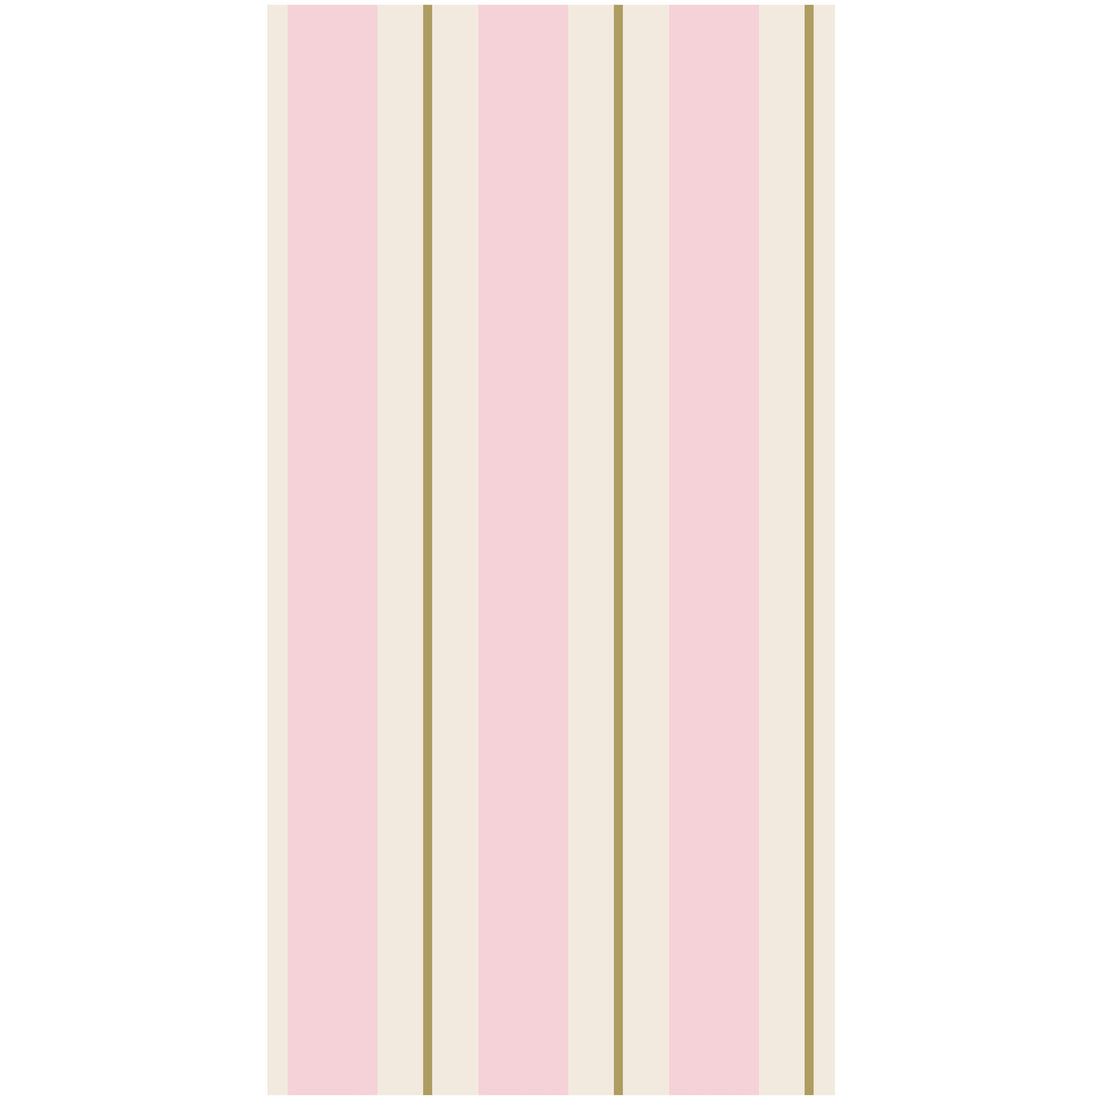 These Pink &amp; Gold Awning Stripe Napkins by Hester &amp; Cook feature a delightful combination of pink and gold stripes, perfect for setting an elegant party table.